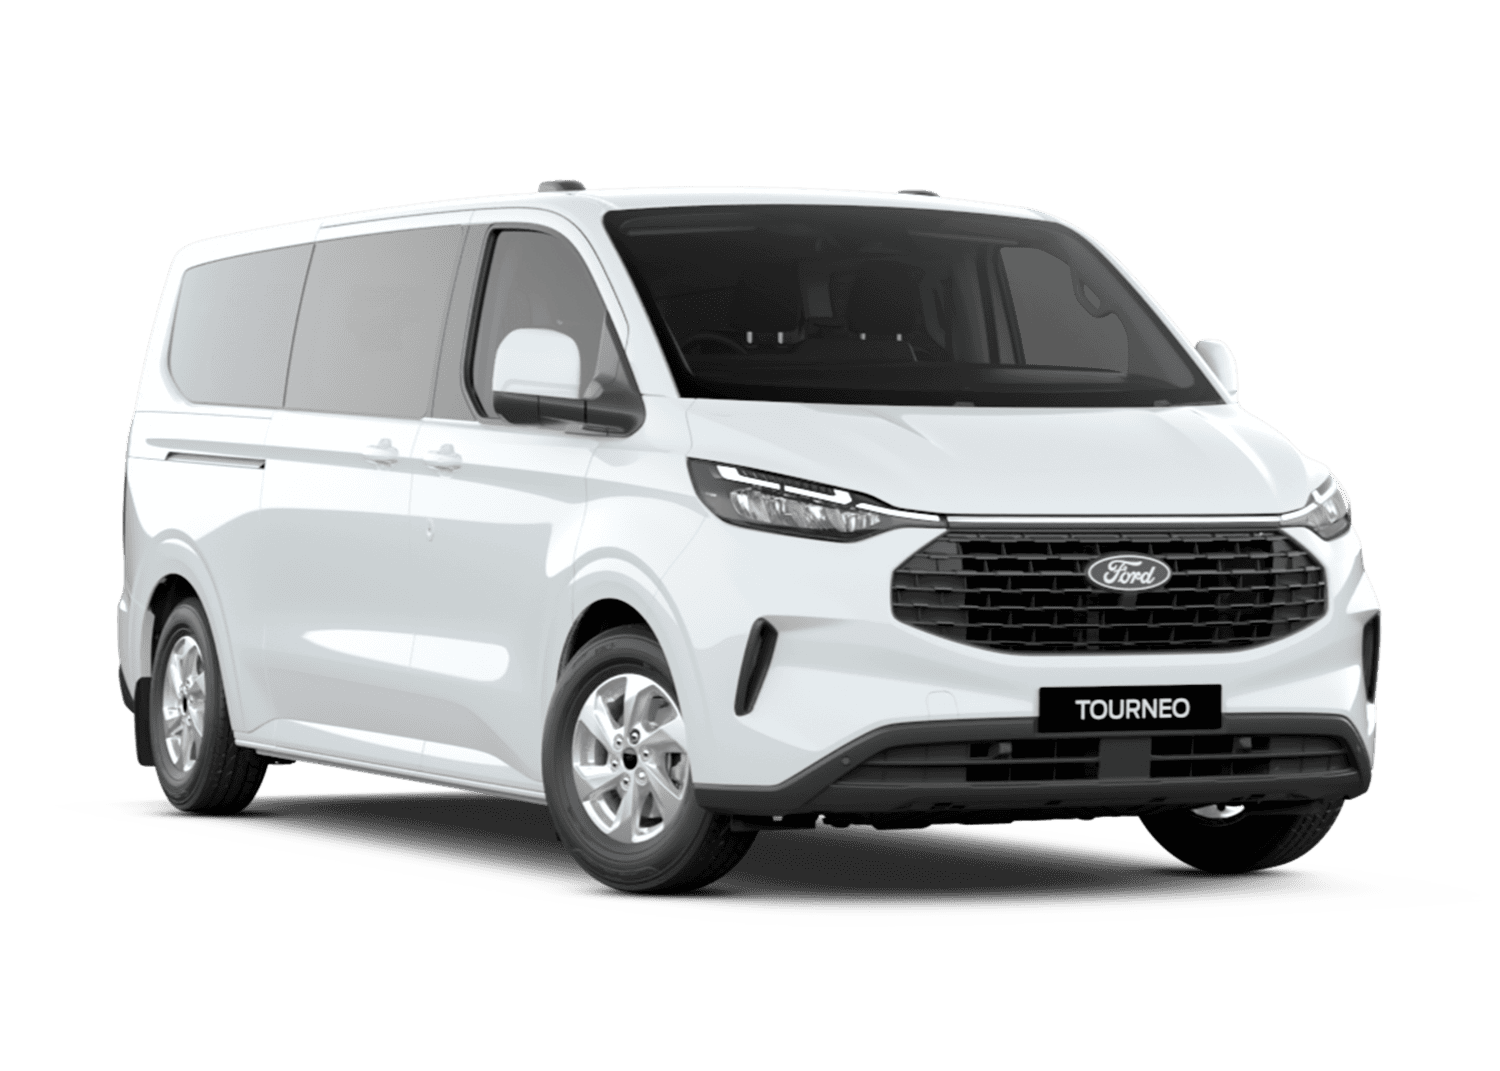 Space-for-eight new Ford Tourneo priced as resurgent Kombi rival